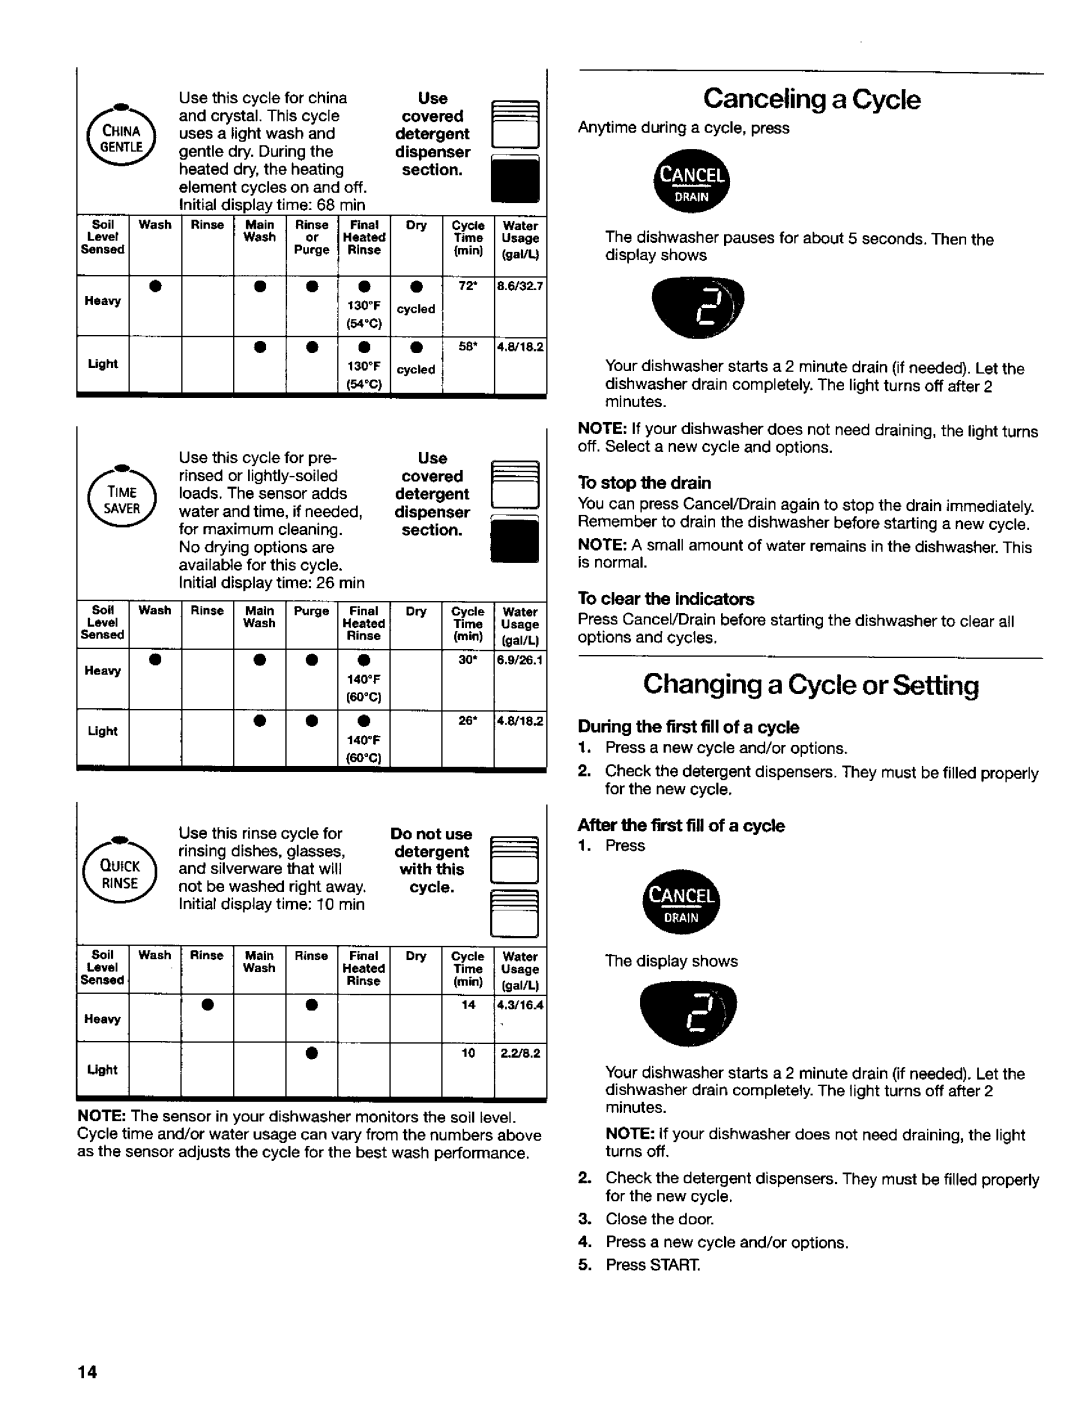 Kenmore 665.16832, 665.16837, 665.15839 Canceling a Cycle, Changing a Cycle or Setting, After the first fill of a cycle 